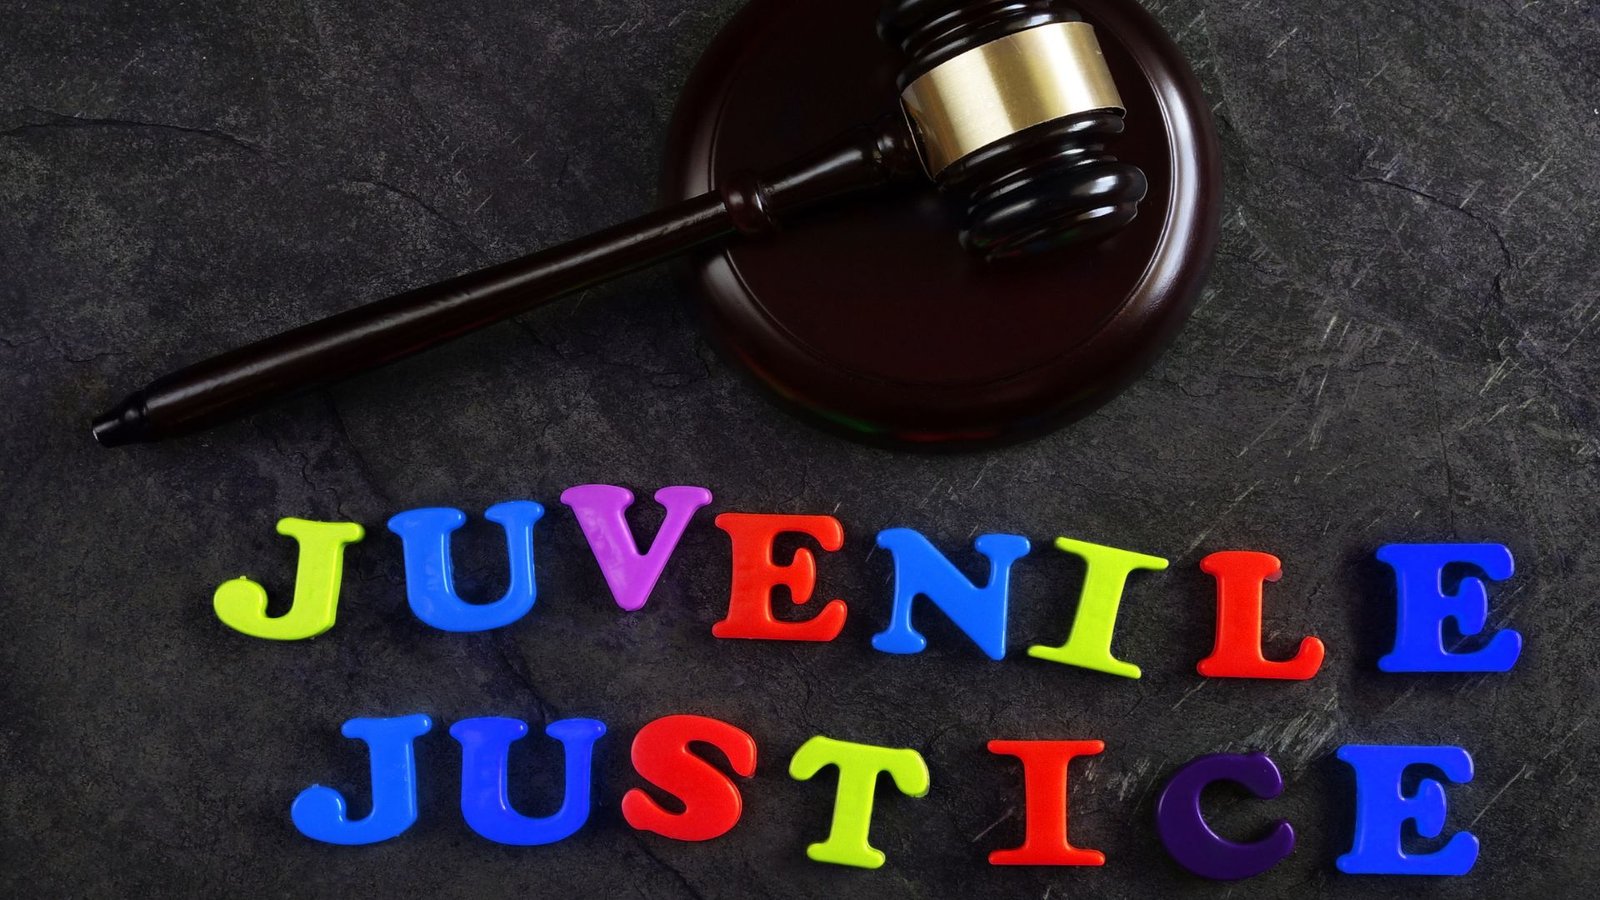 India Juvenile Justice System, Lawforeverything